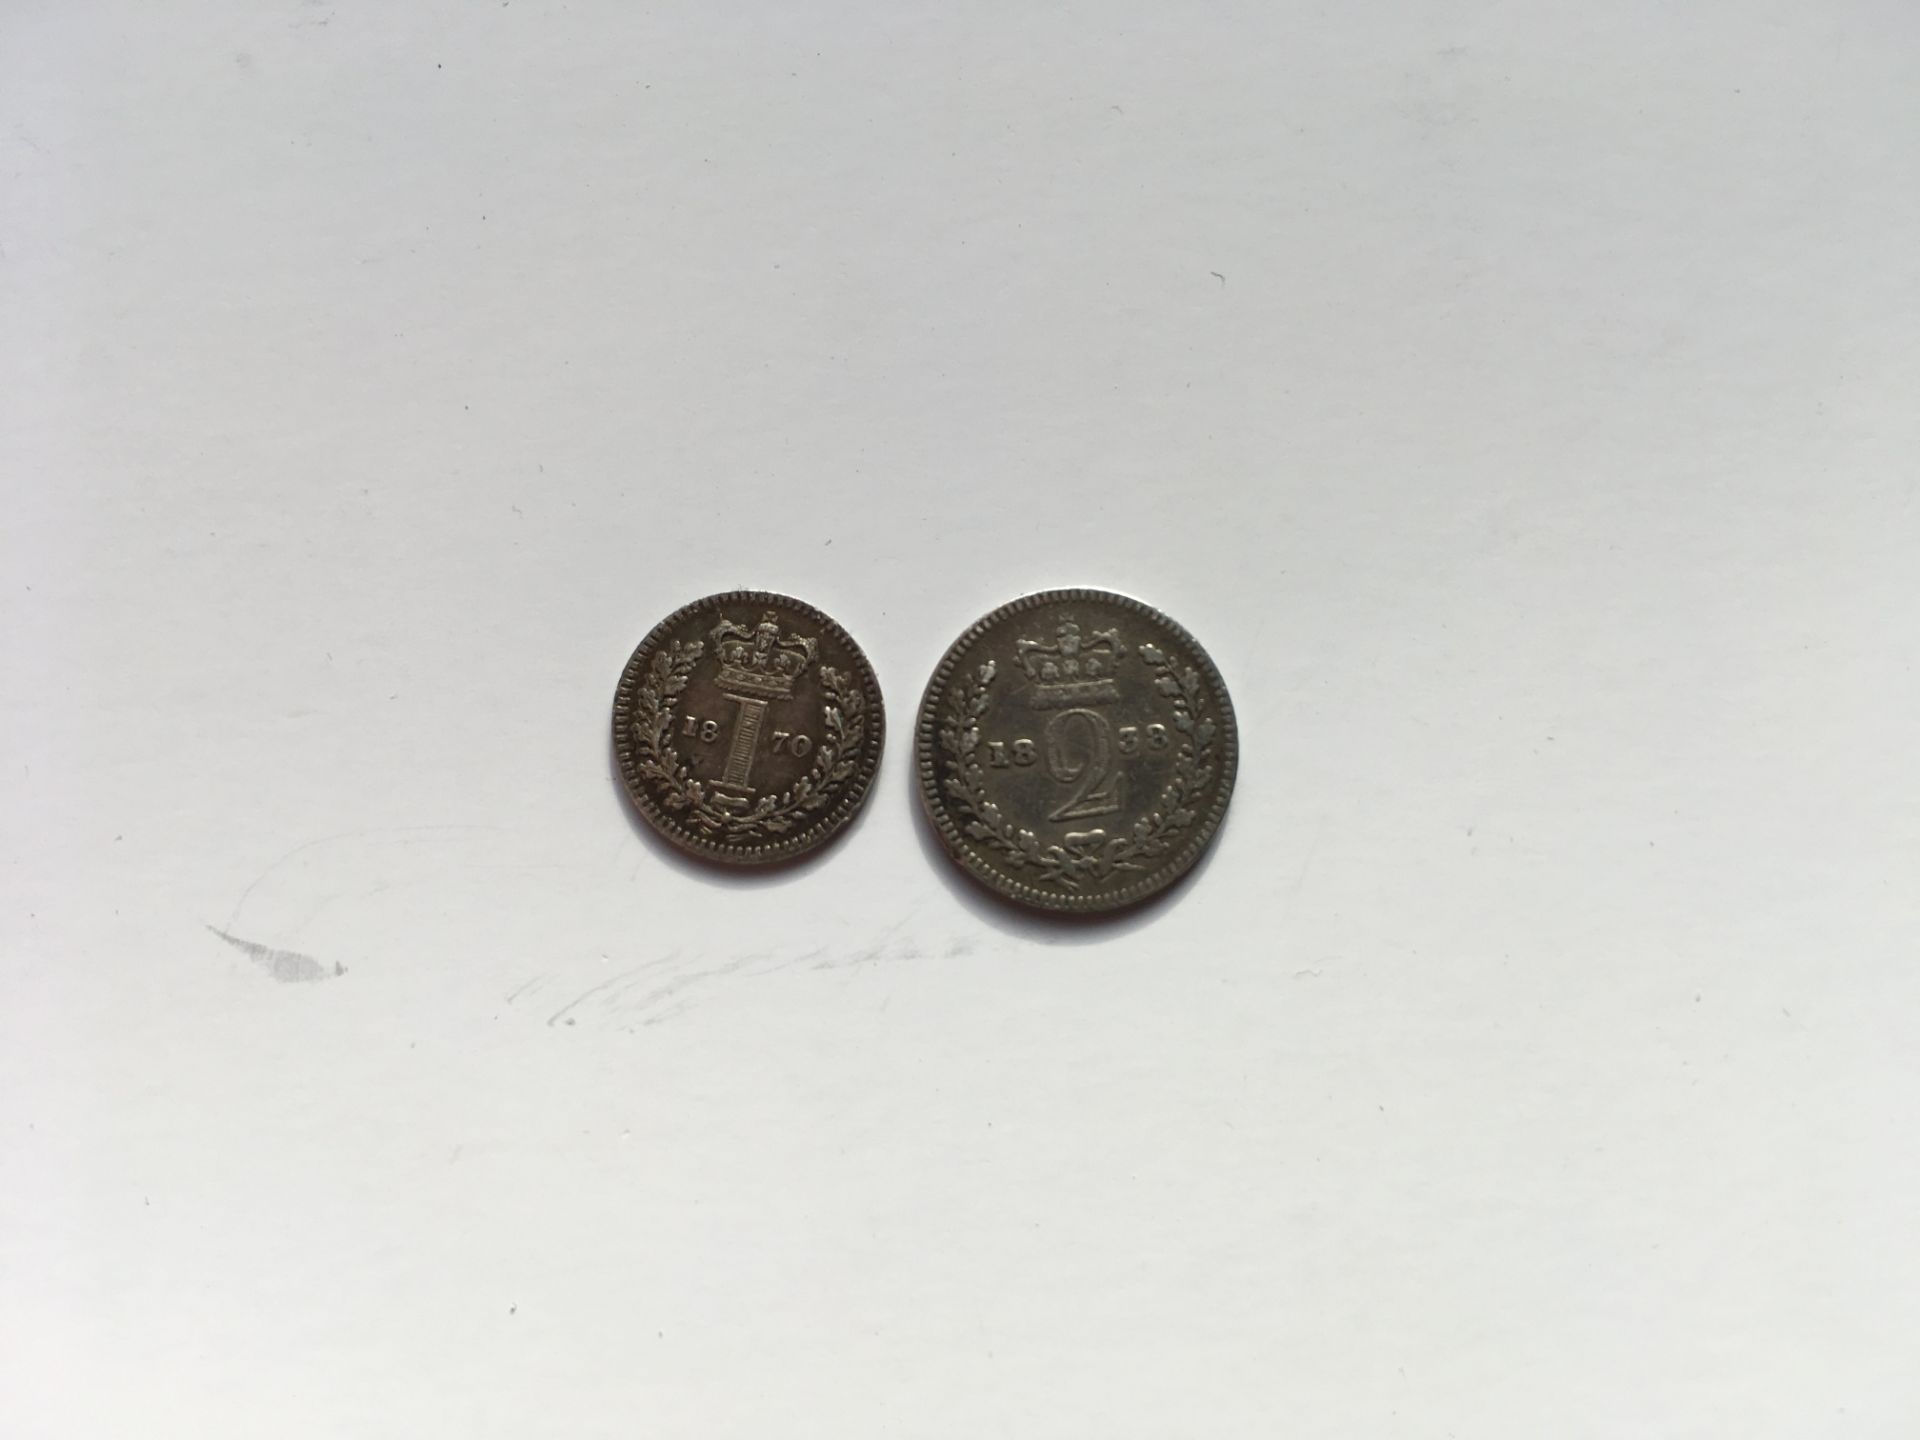 COINS: GB MAUNDY PENNY 1870 AND TWO PENCE 1838. - Image 3 of 8